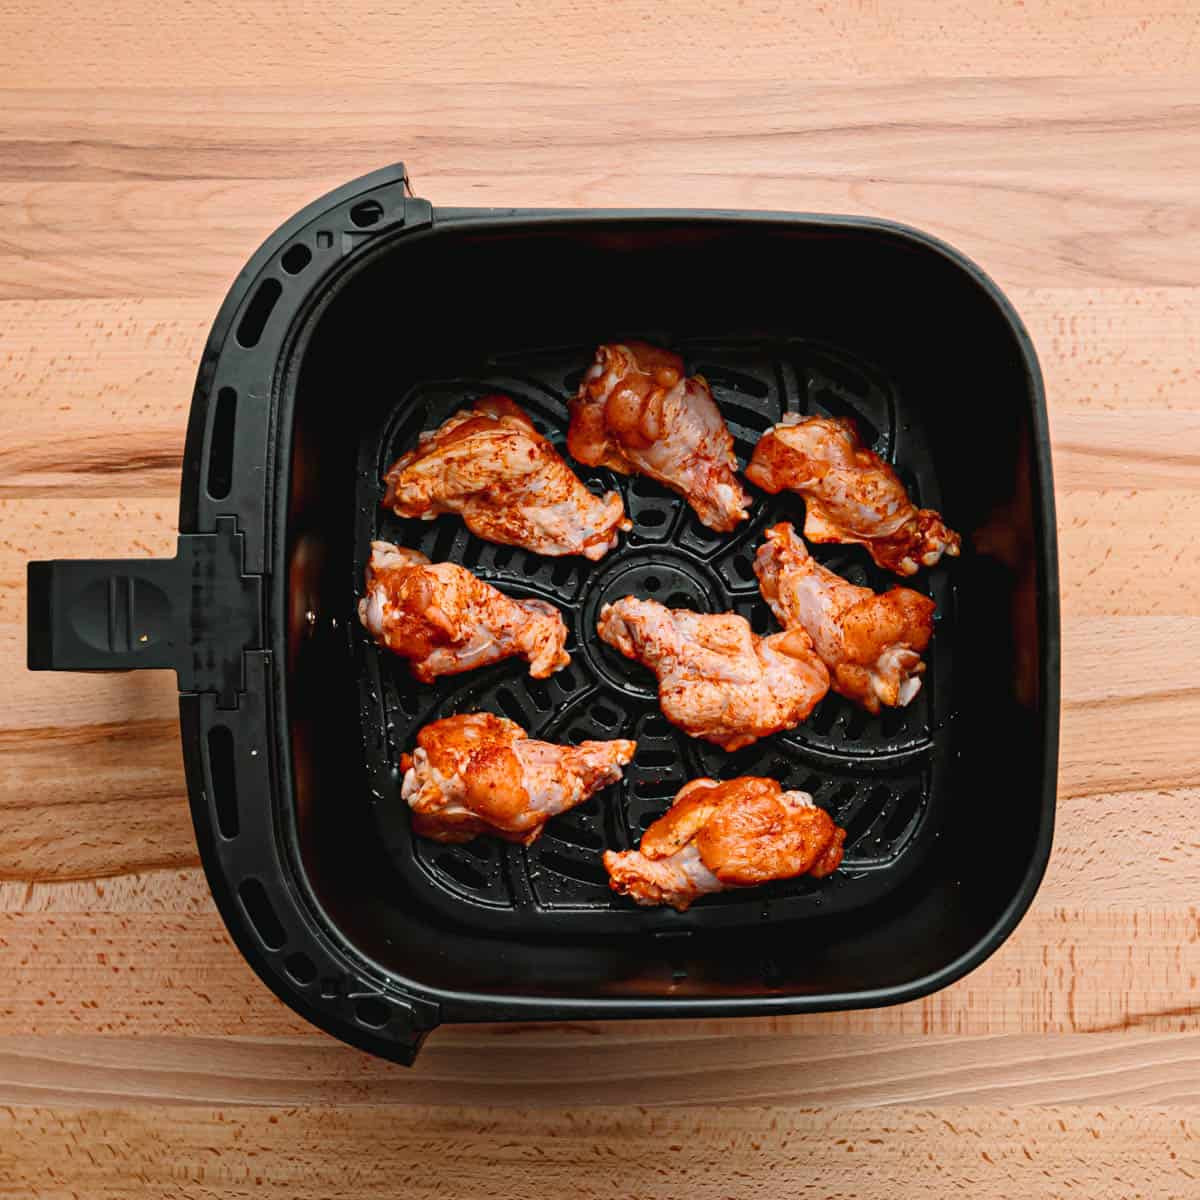 Add drummettes to the air fryer basket. Cook for about 10 minutes then flip, and continue cooking for 10 minutes. Transfer the drummettes to a large bowl. 